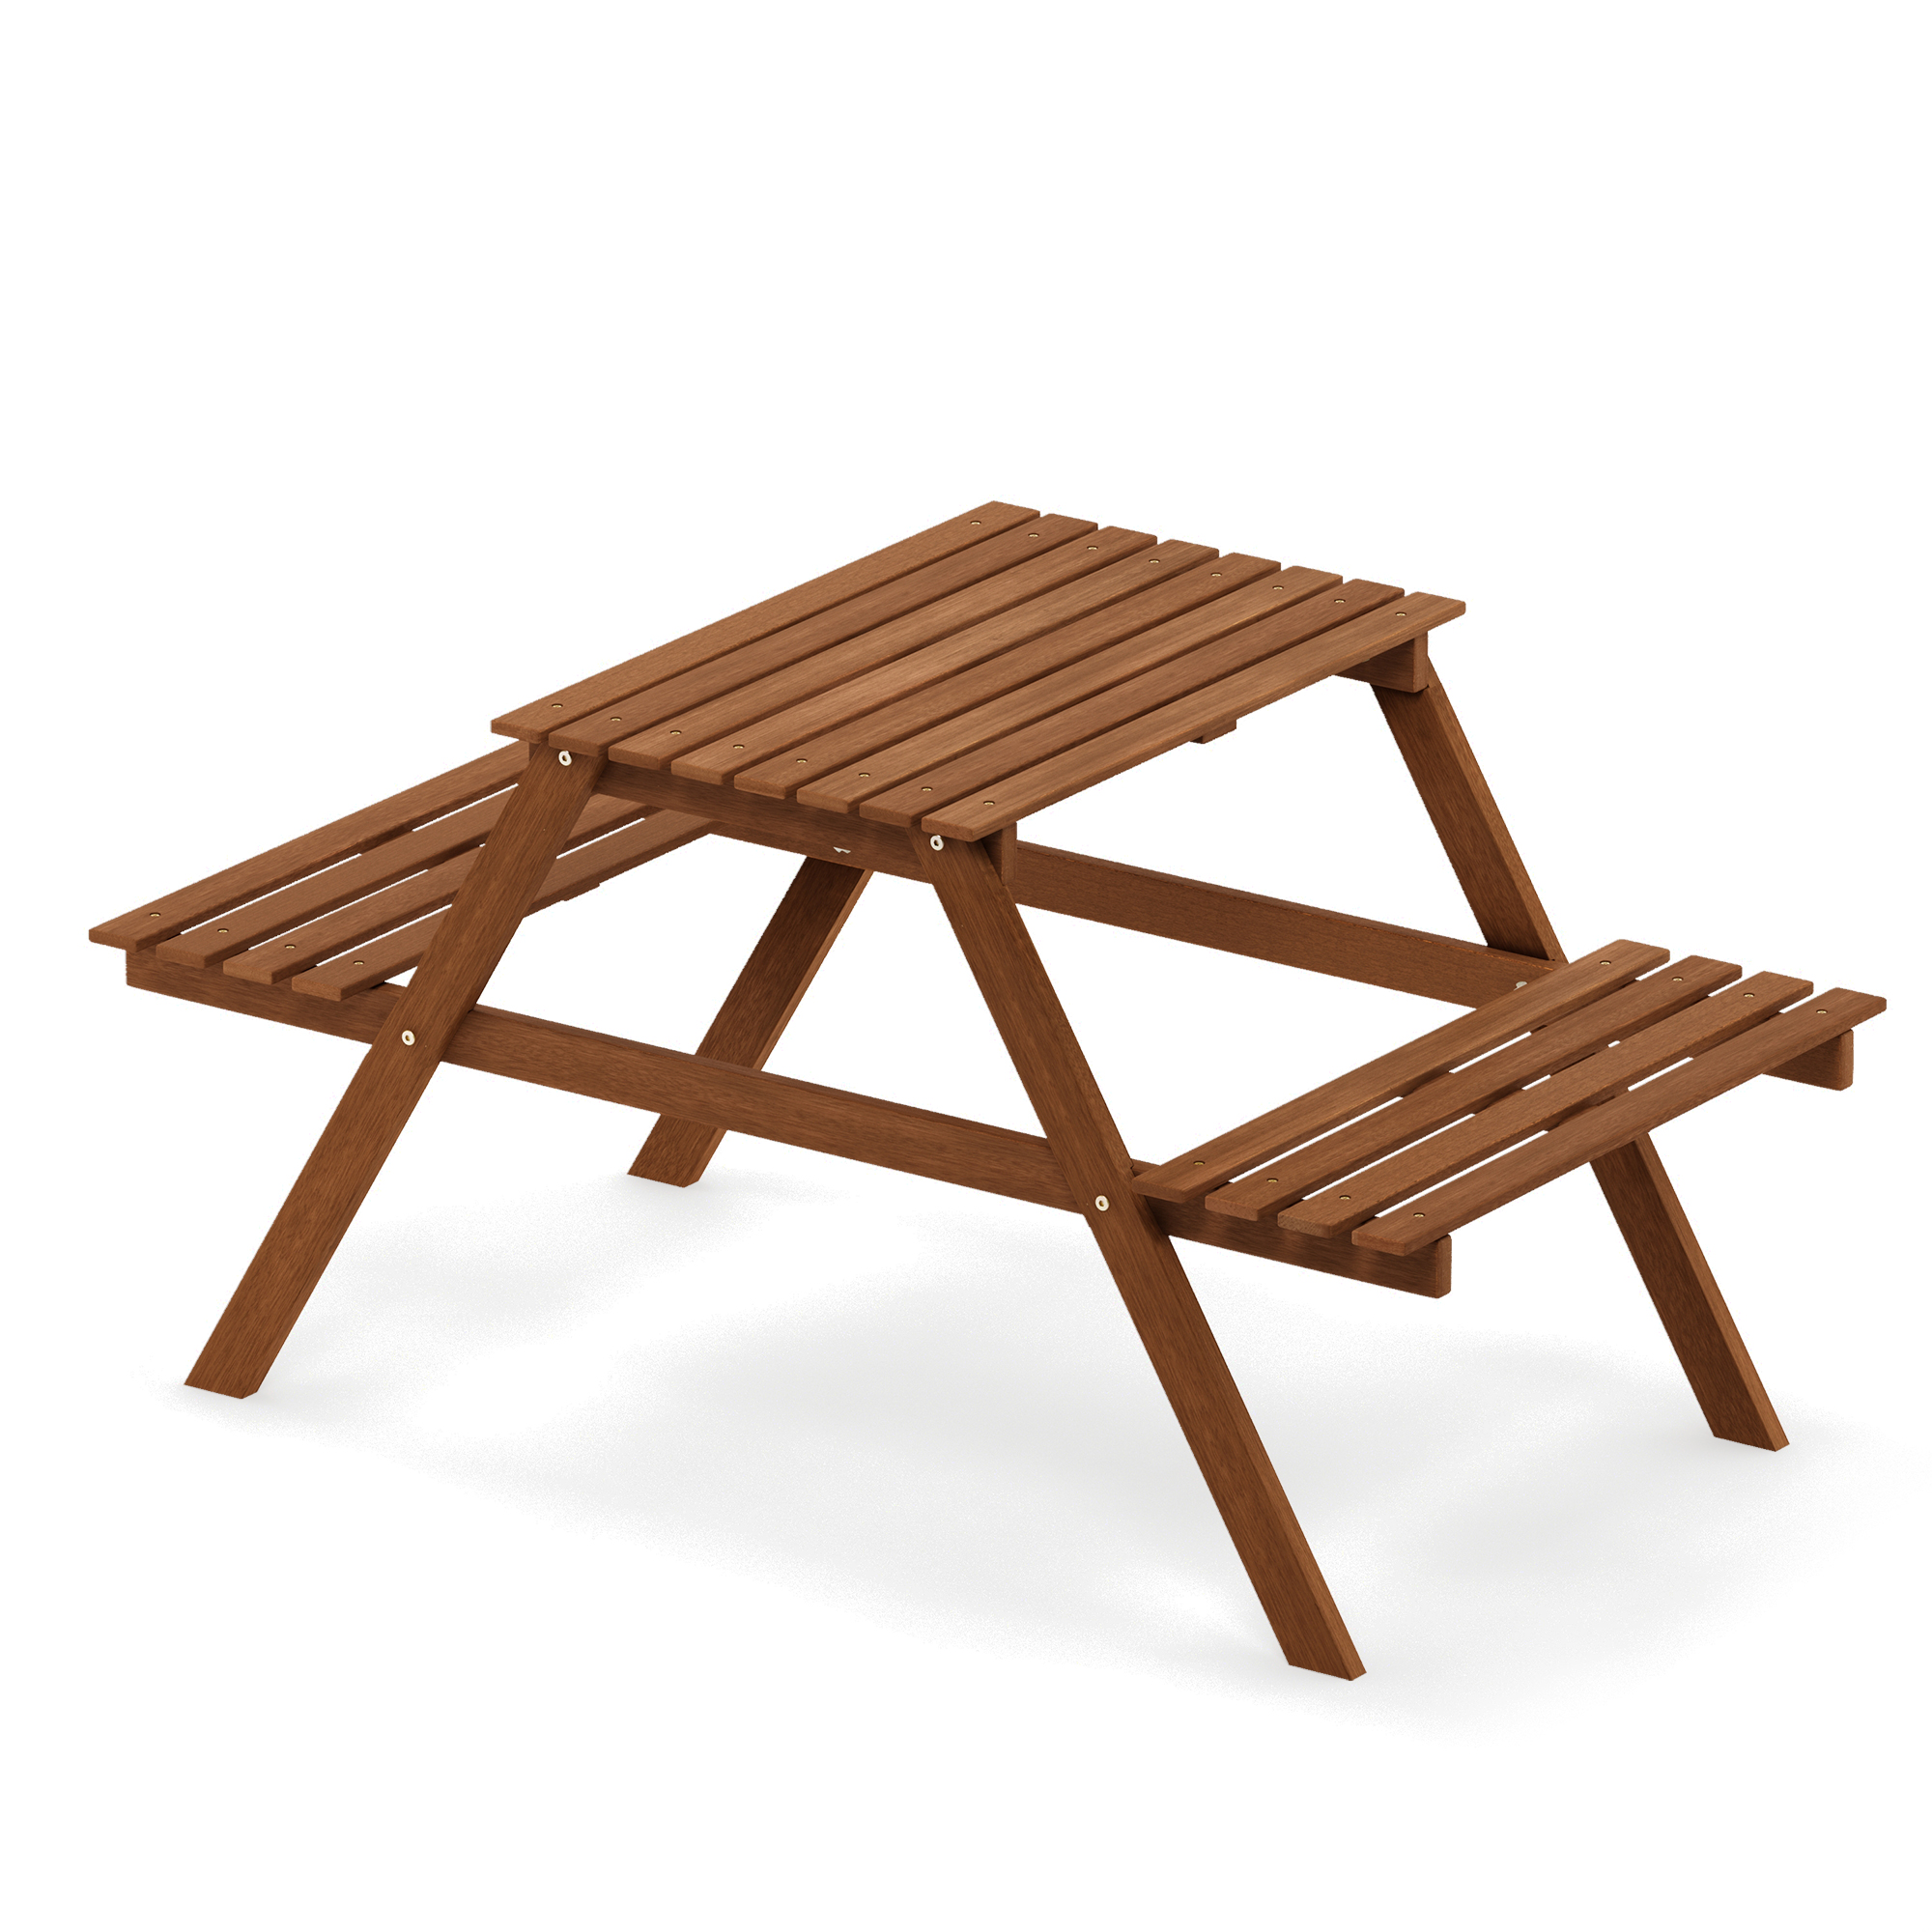 Furinno Tioman Hardwood Kids Picnic Table and Chair Set in Teak Oil - image 1 of 6